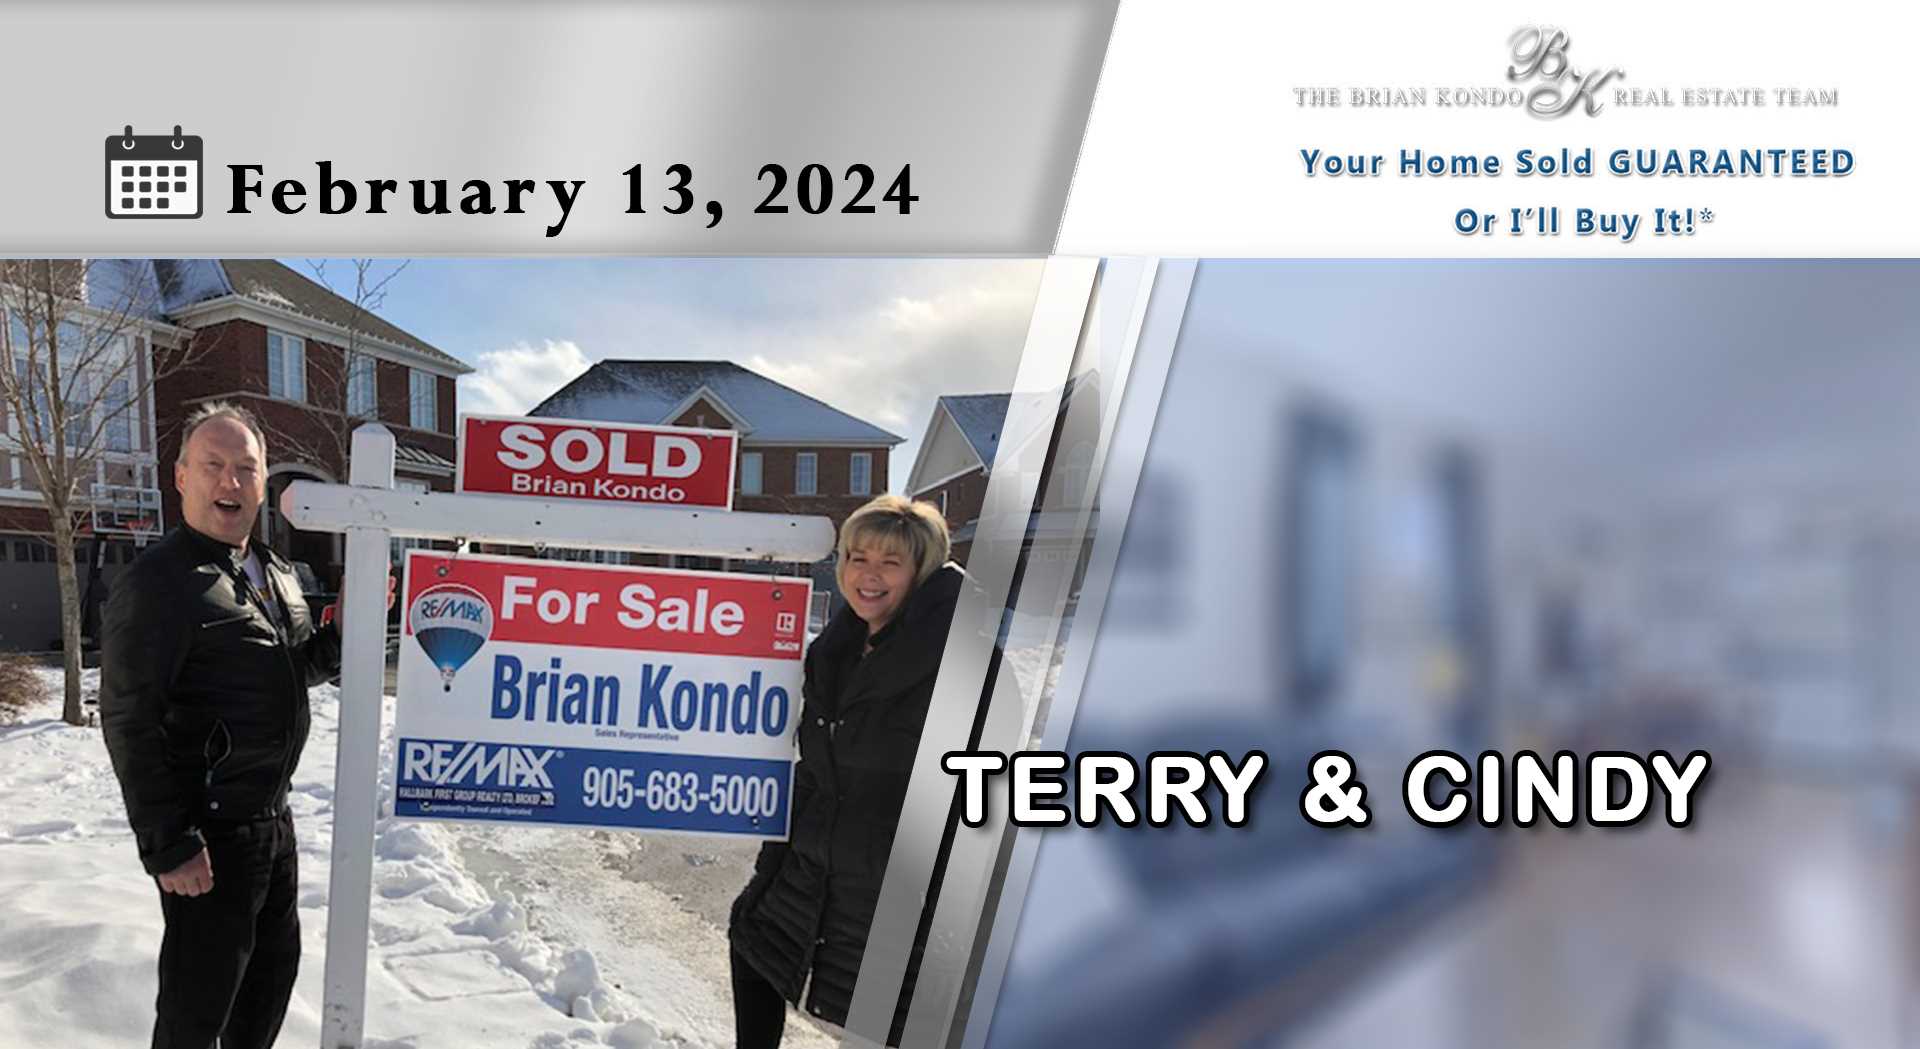 What Our Clients Had to Say About Working With The Brian Kondo Real Estate Team | Cindy & Terry